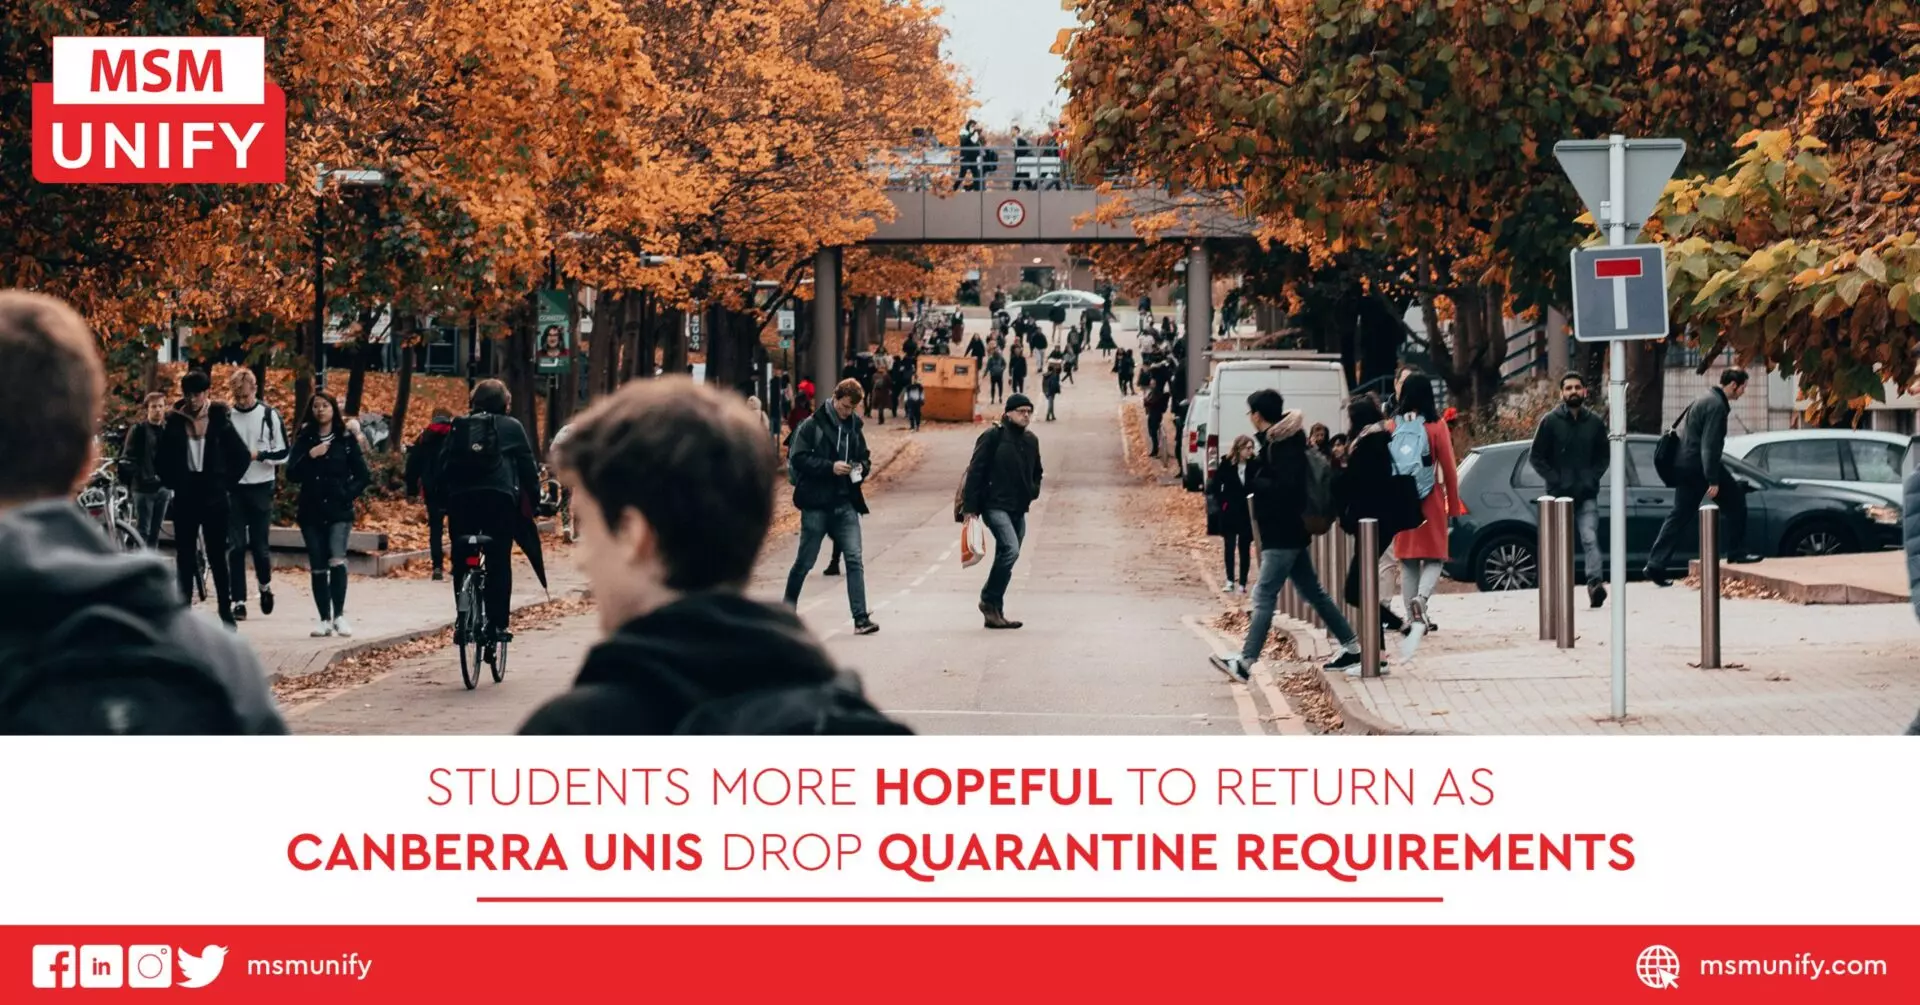 Students More Hopeful To Return as Canberra Unis Drop Quarantine Requirements scaled 1